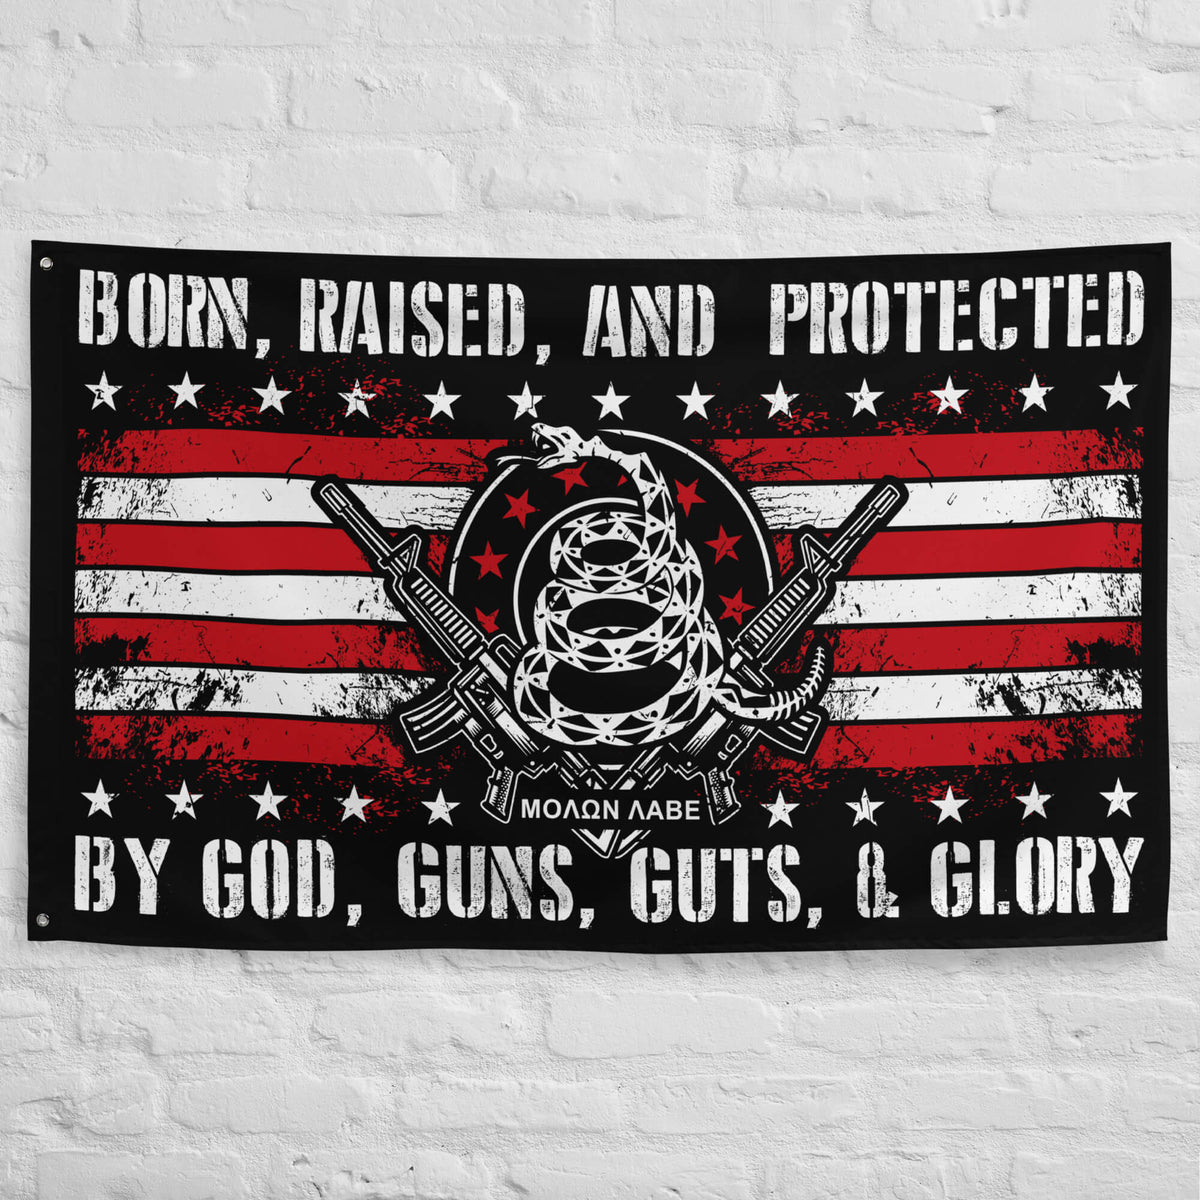 Protected by God, Guns, Guts &amp; Glory! (Flag)